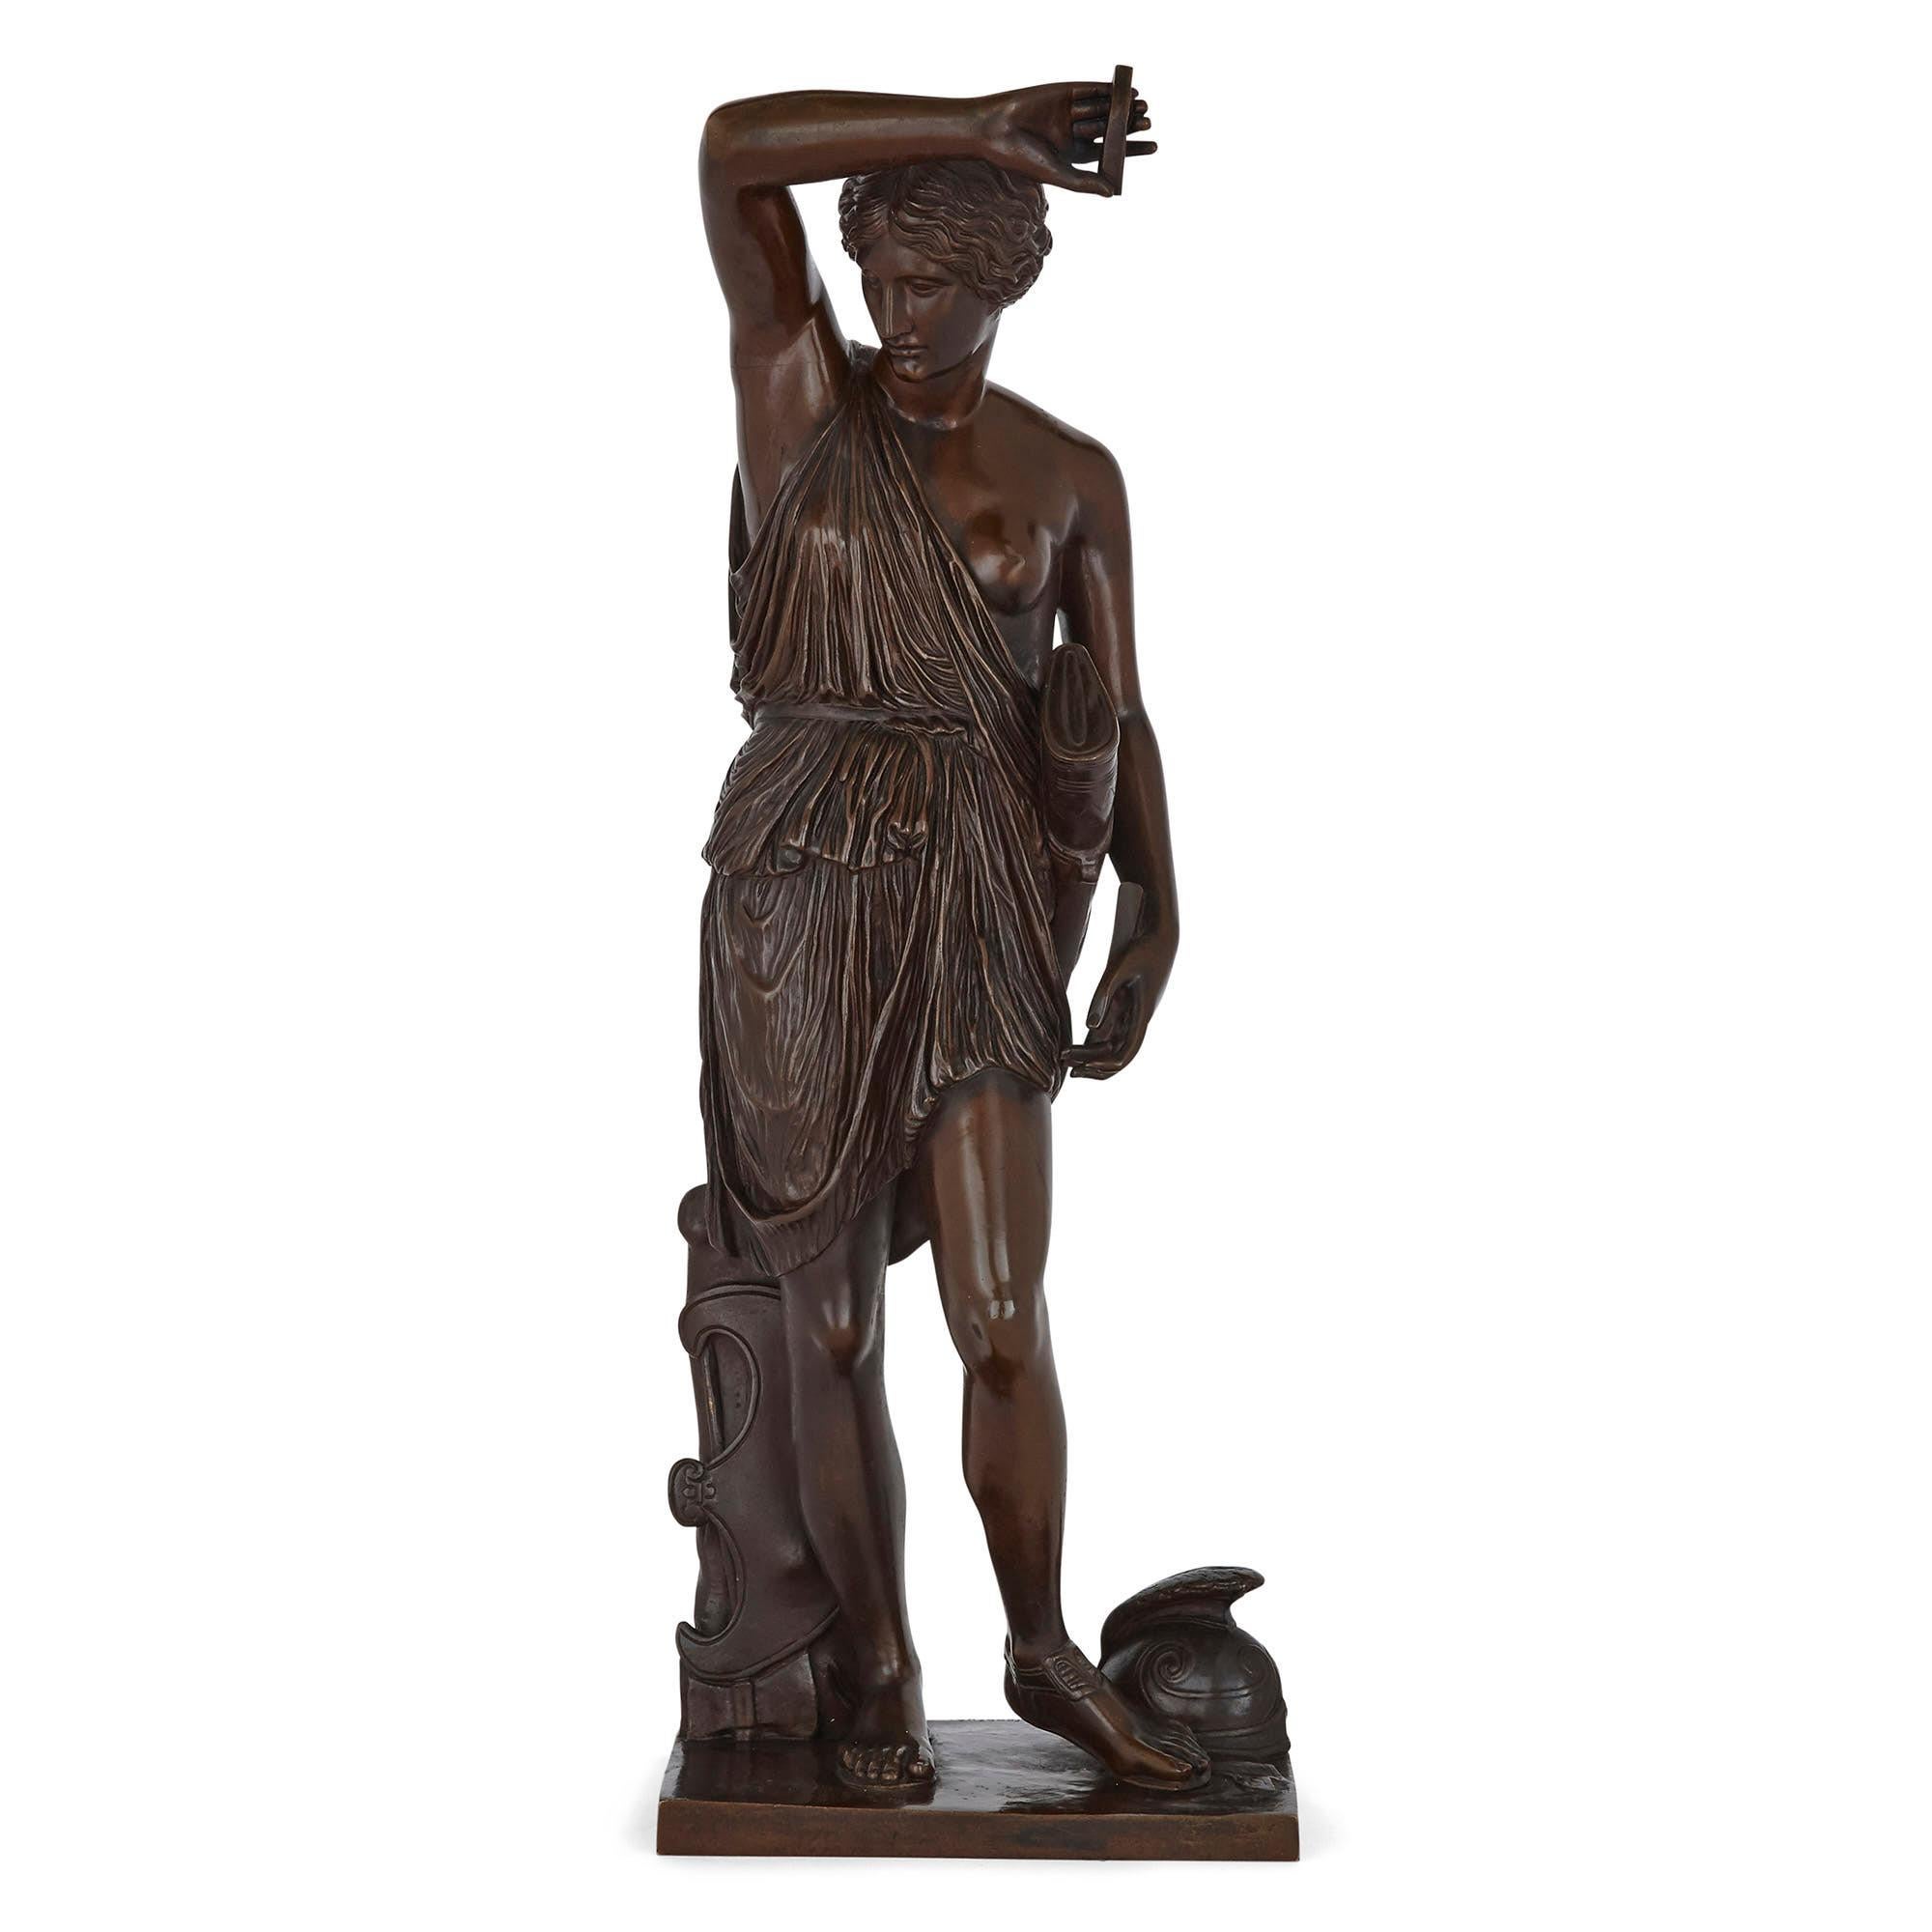 Antique Patinated Bronze Sculpture of Diana by Ferdinand Barbedienne
French, late 19th Century
Dimensions: Height 60cm, width 22cm, depth 22cm

This patinated bronze figure depicts the Roman goddess Diana (or Artemis in Ancient Greek religion). She